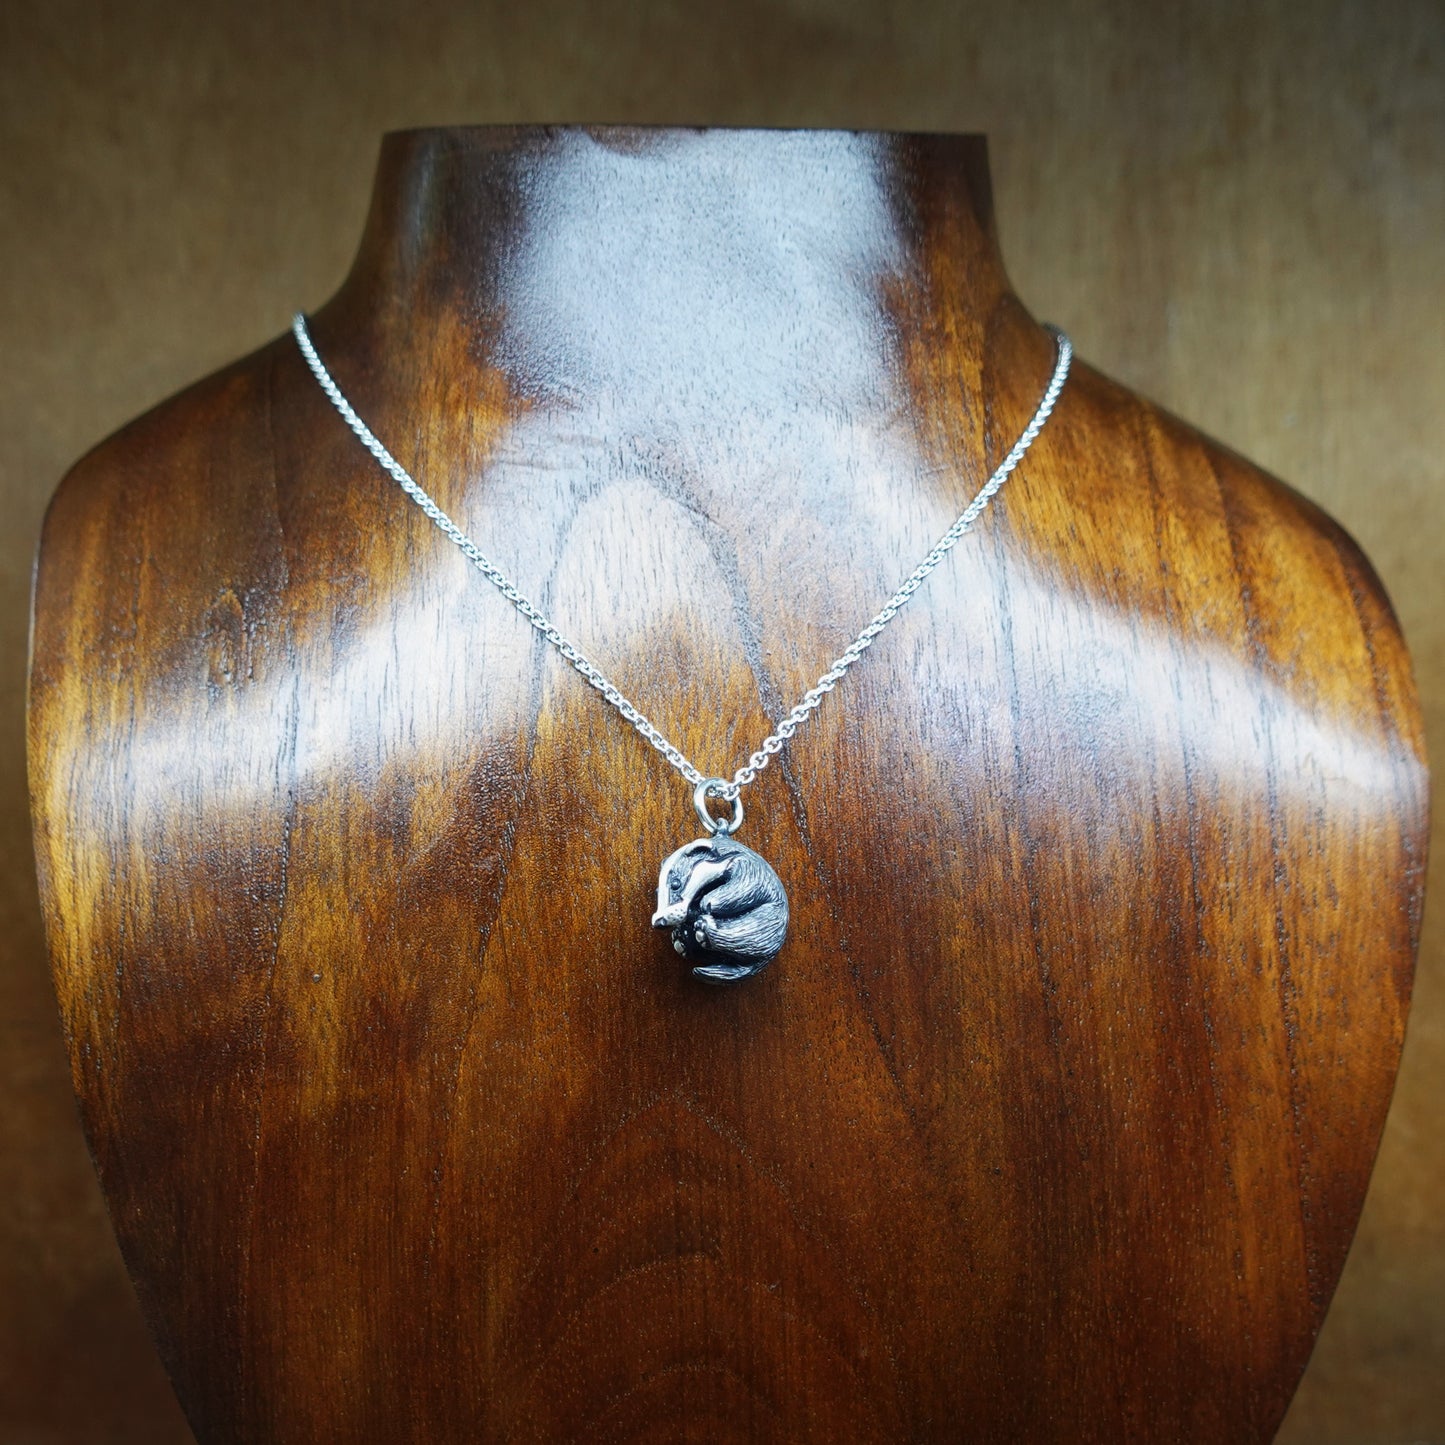 Baby badger necklace, sterling silver wildlife pendant © Adrian Ashley